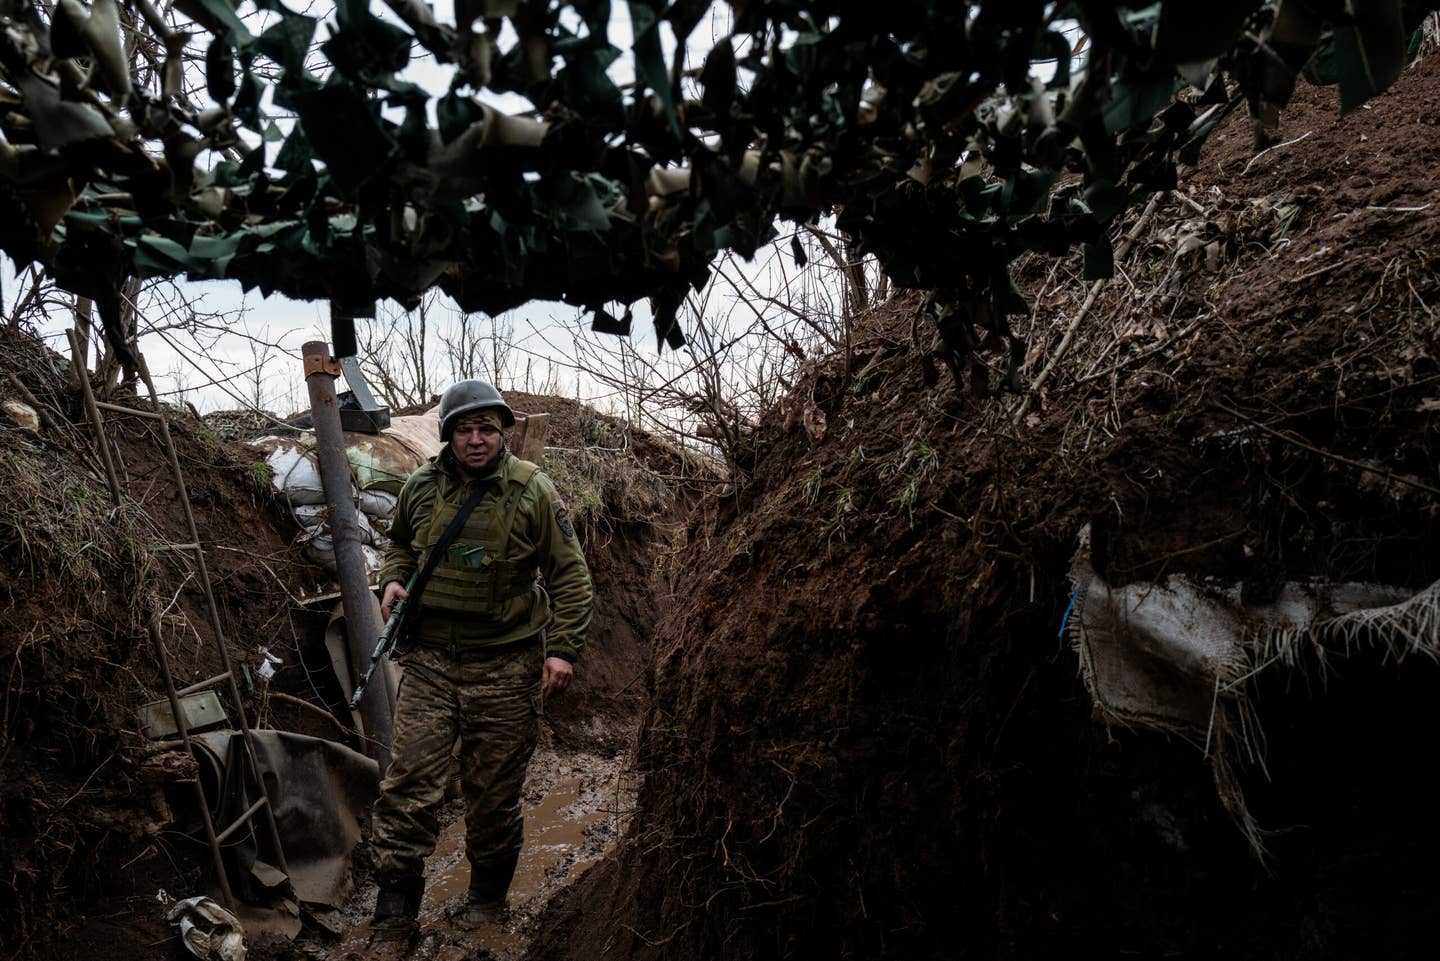 In a scene eerily reminiscent of World War One trench warfare, another soldier from the Ukrainian 24th Mechanized Brigade is seen south of Bakhmut, Ukraine. <em>Photo by Wolfgang  Schwan/Anadolu Agency via Getty Images</em>